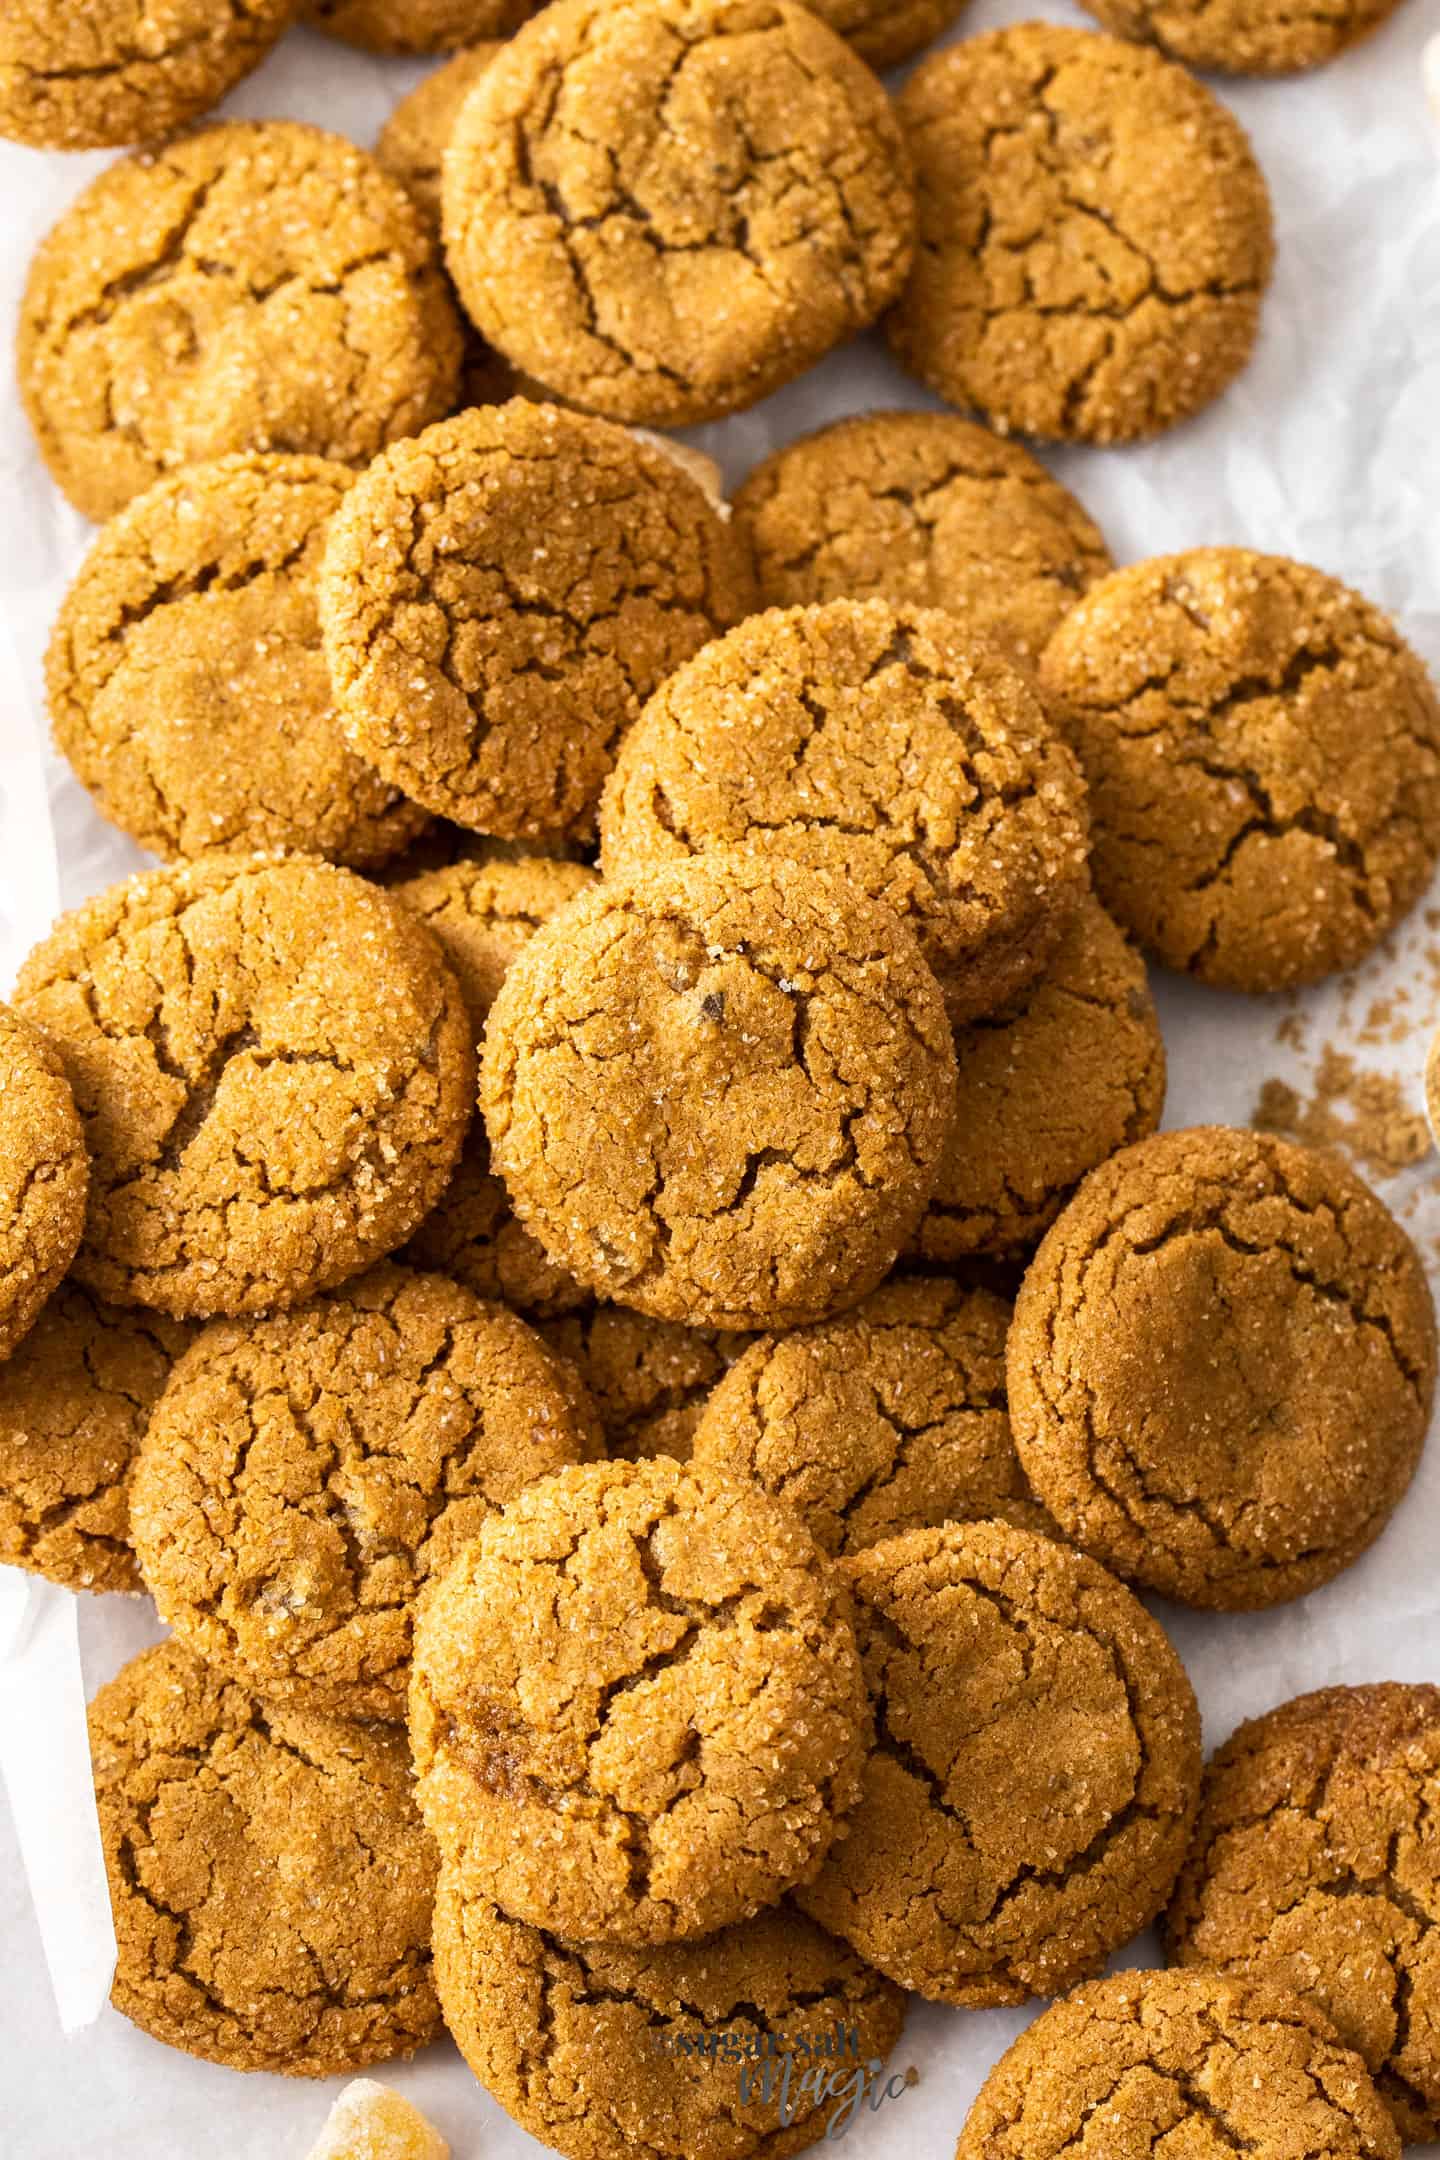 A pile of ginger cookies on a sheet of baking paper.